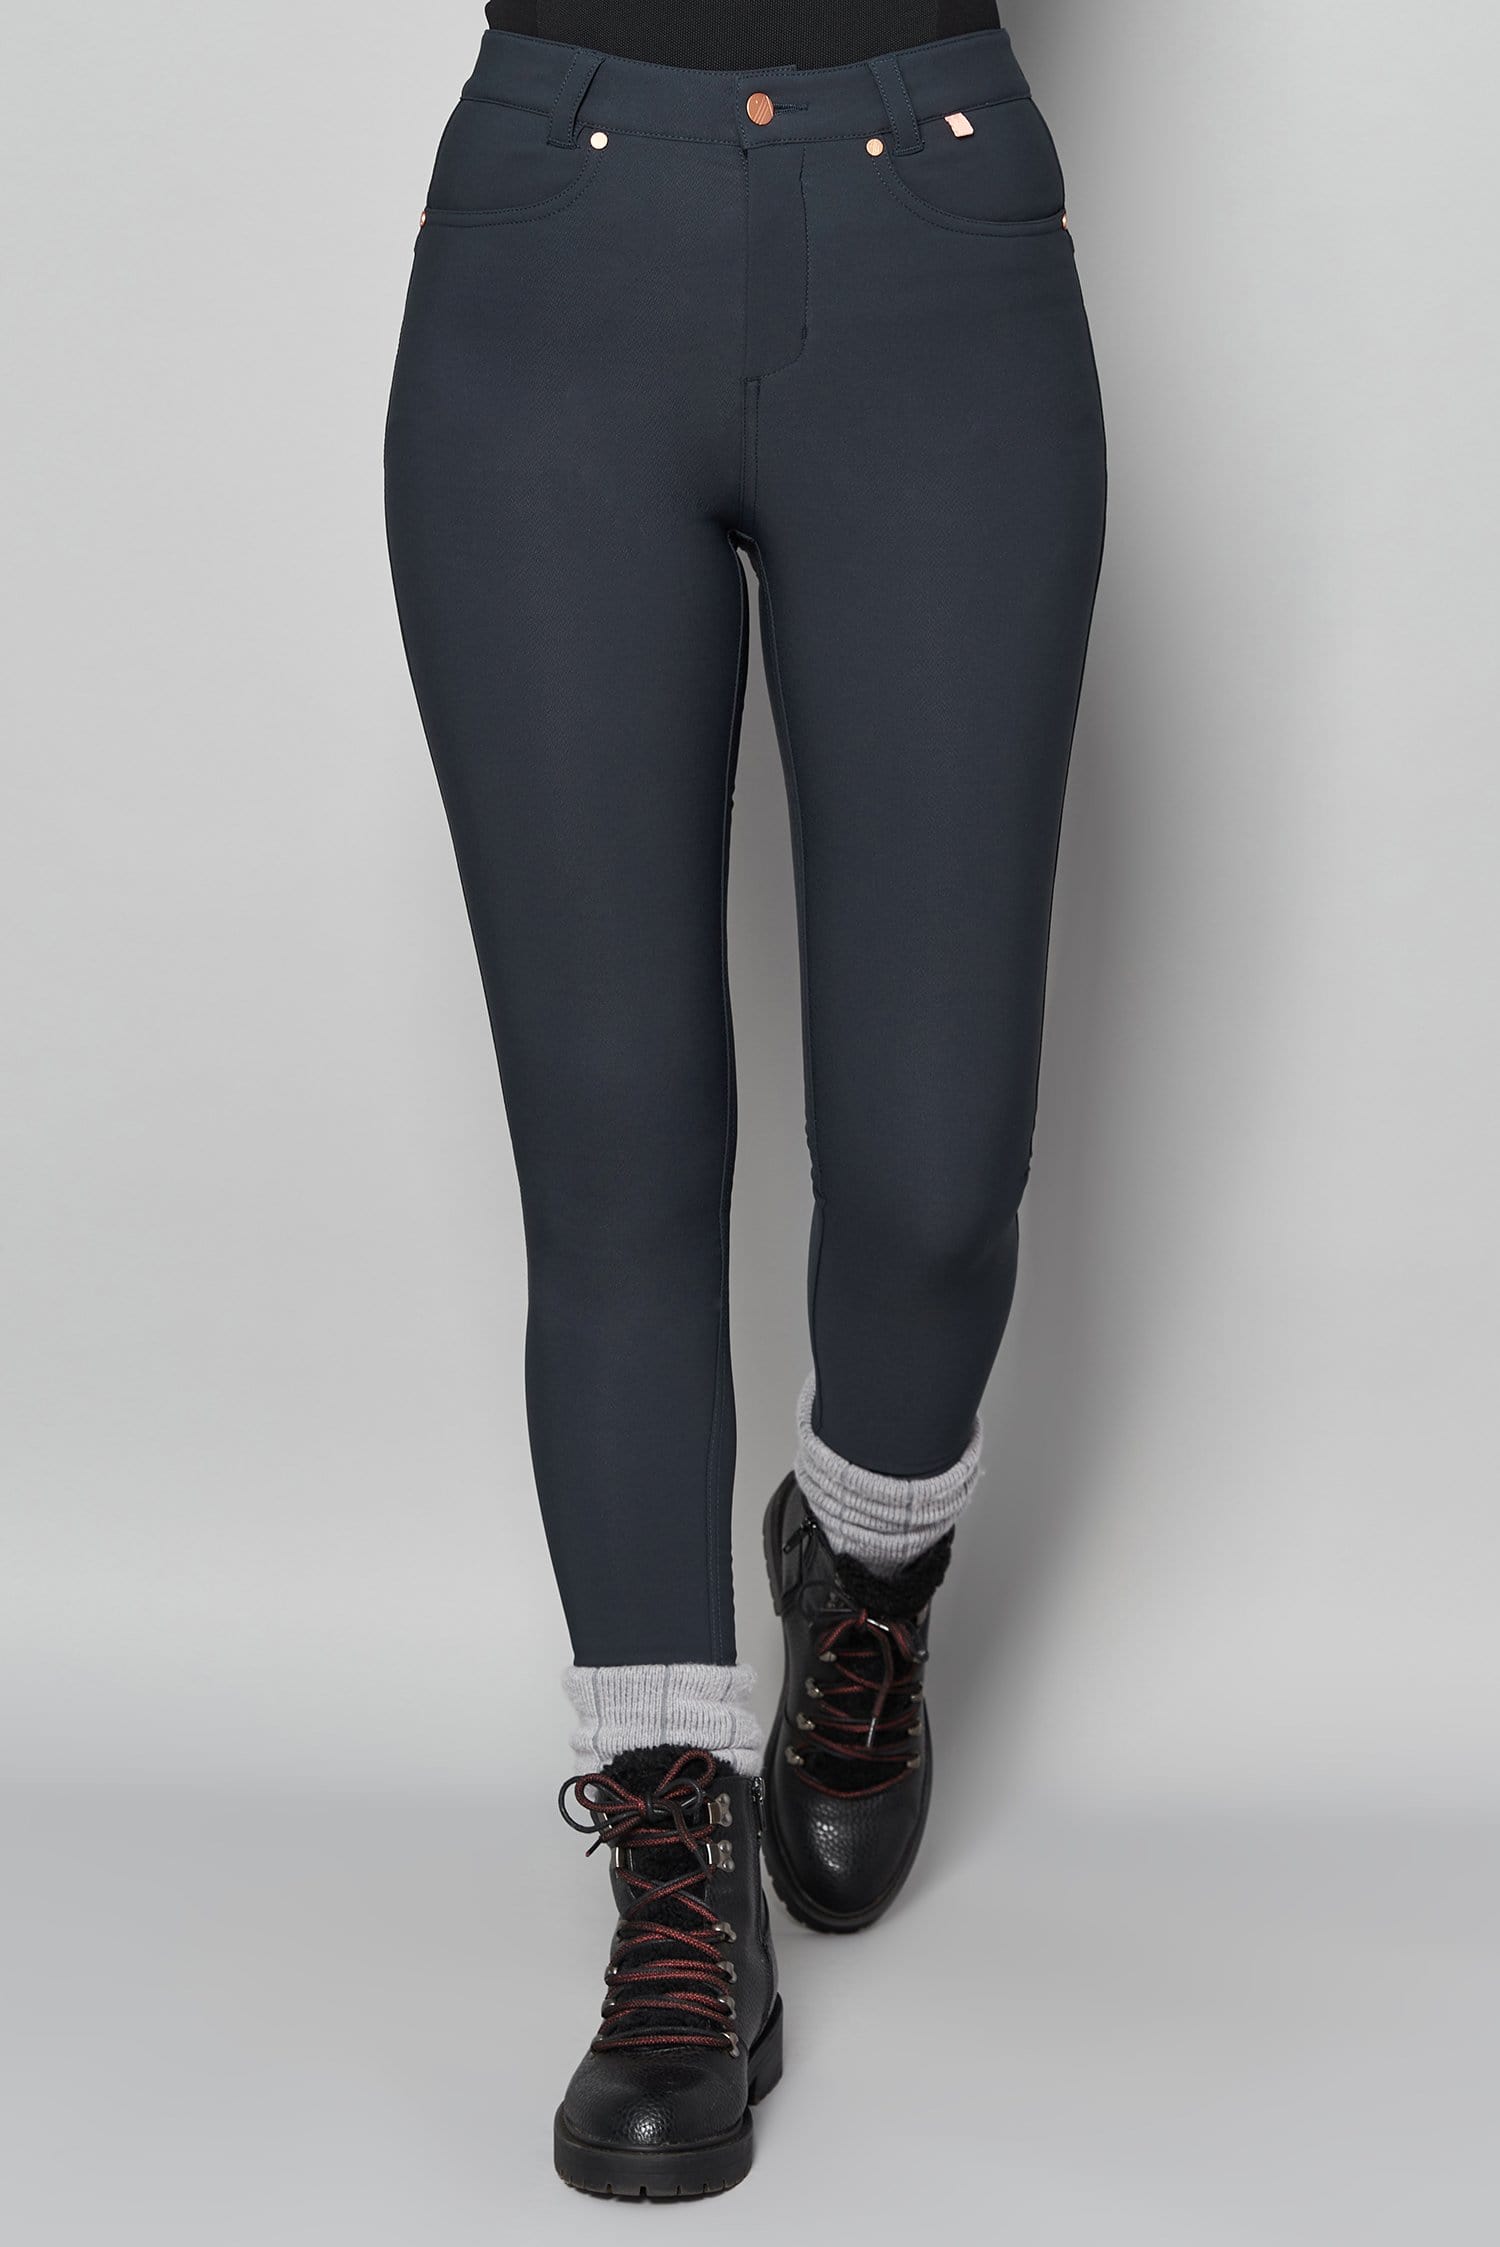 Thermal Skinny Outdoor Trousers - Graphite - 32r / Uk14 - Womens - Acai Outdoorwear